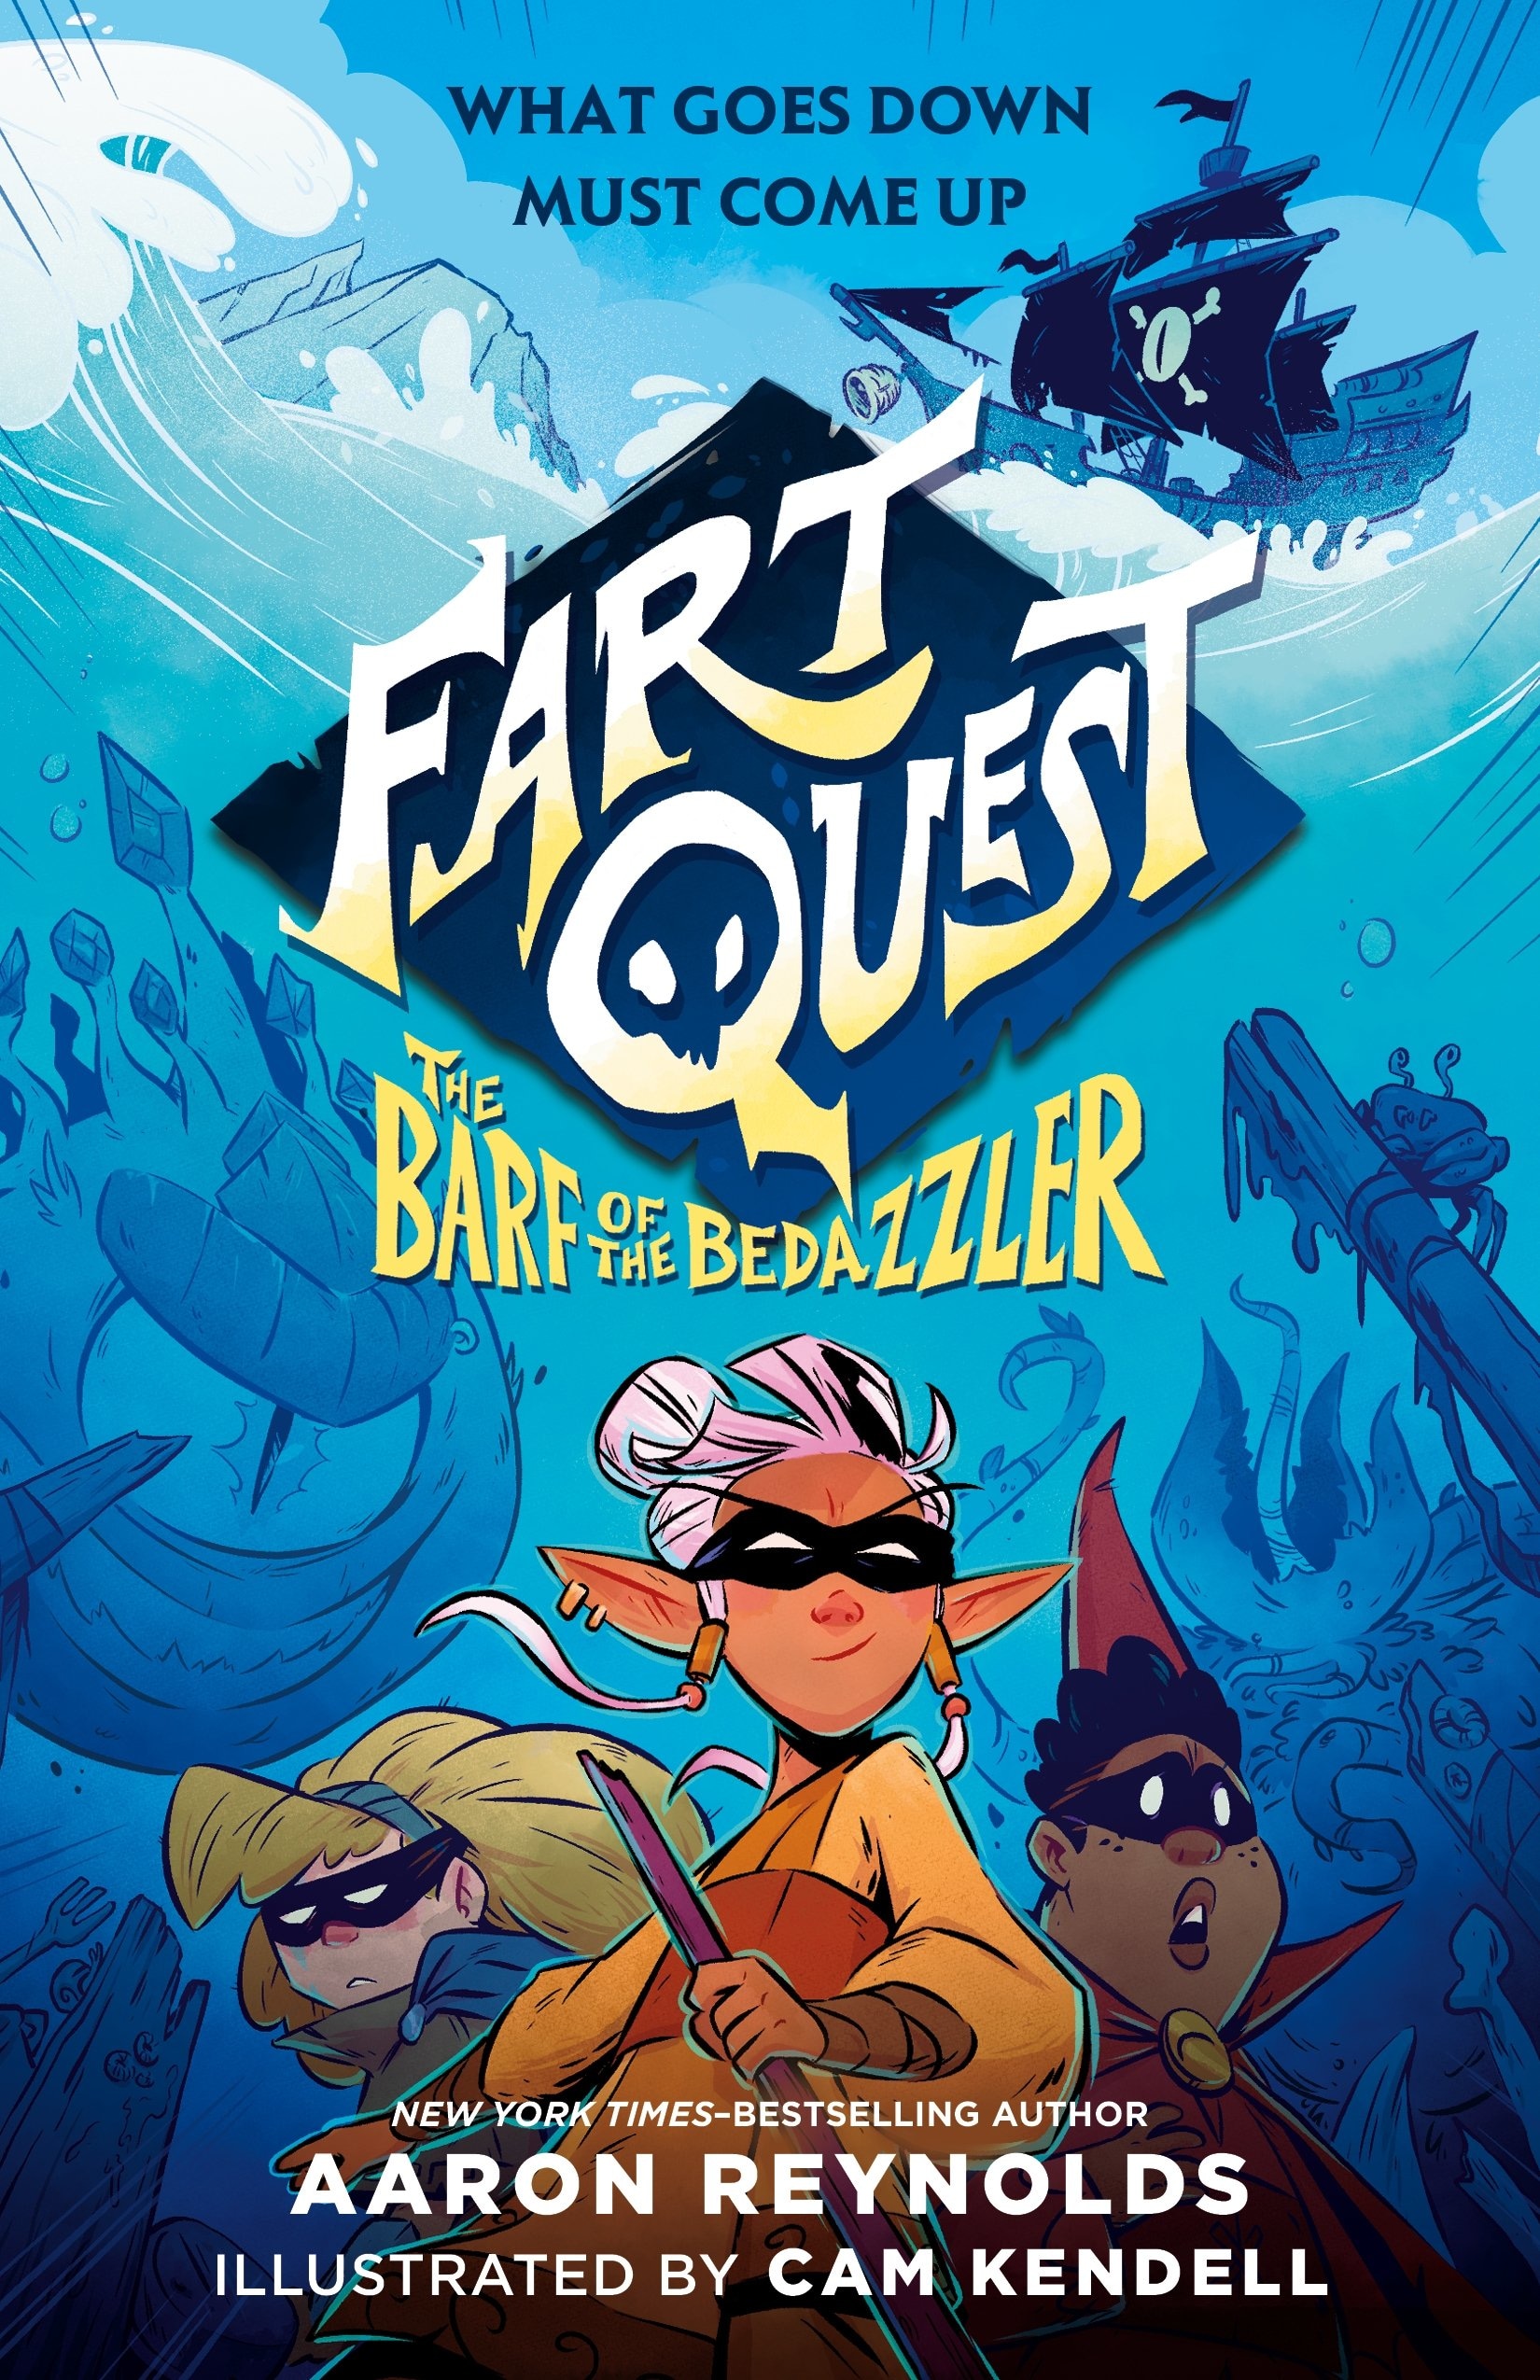 Book “Fart Quest: The Barf of the Bedazzler” by Aaron Reynolds — February 2, 2021